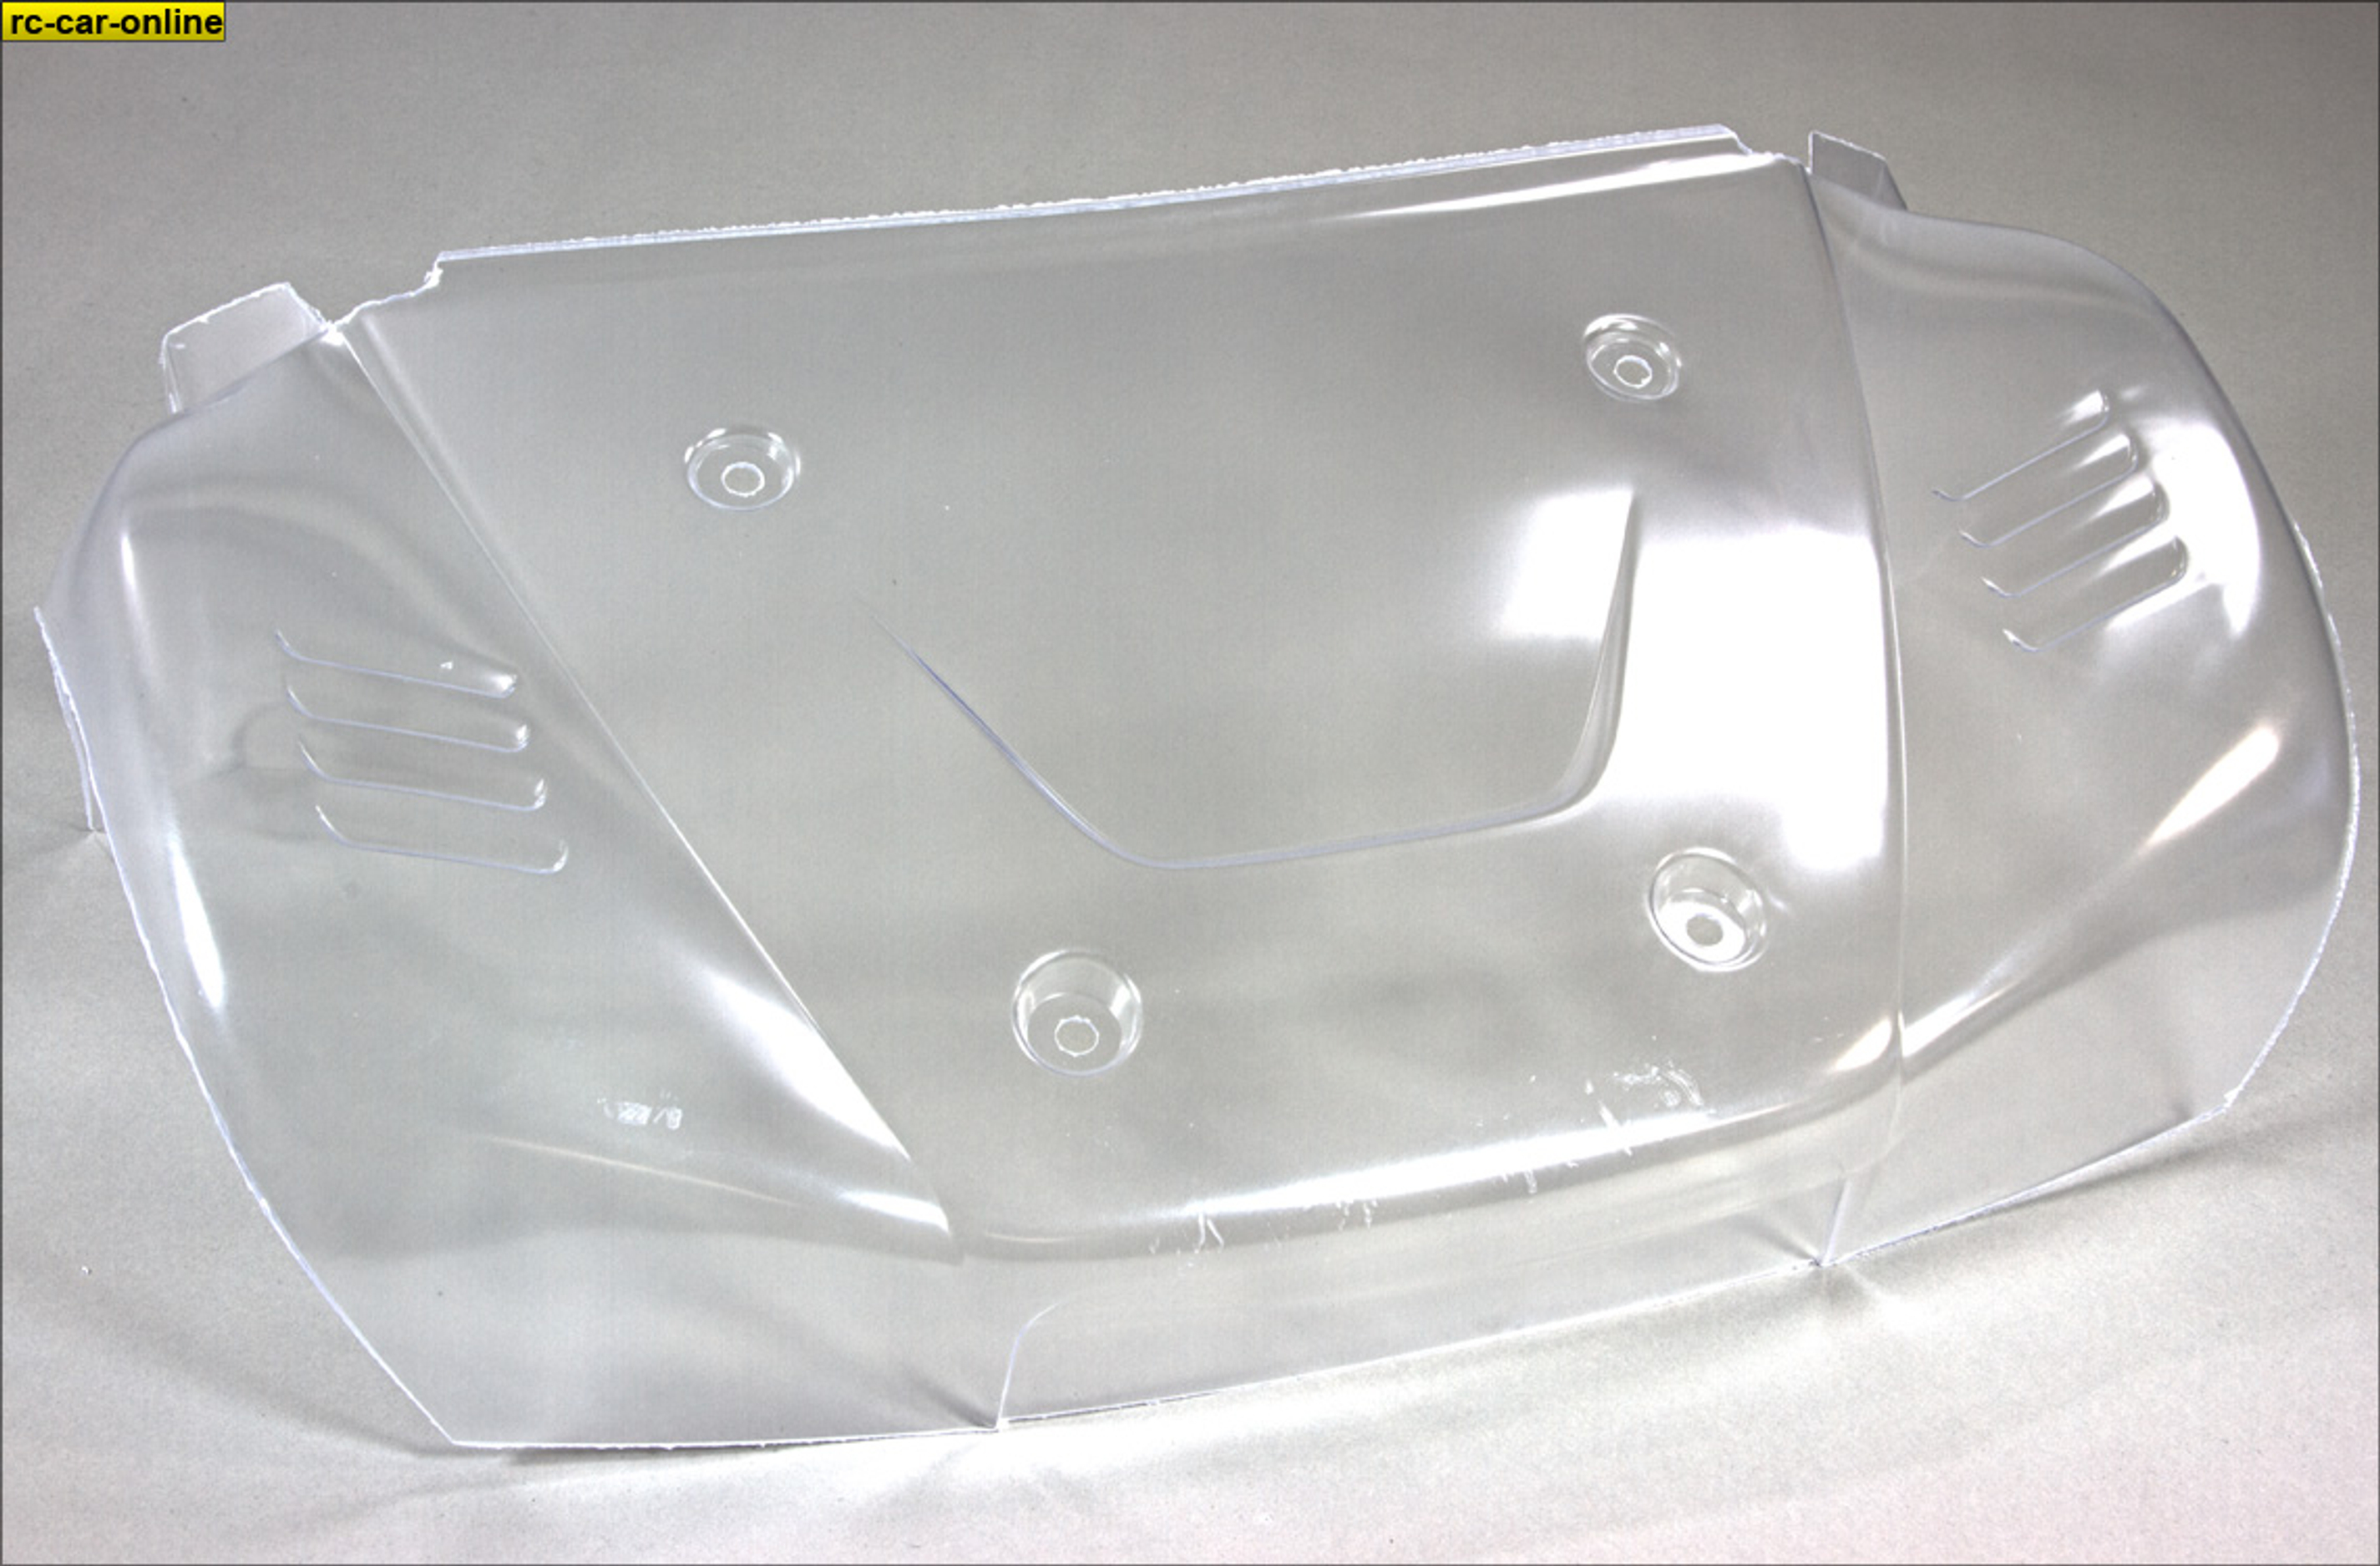 LOSB 8101 Hood/Front Fenders Body Section clear  5T, 1 pce.